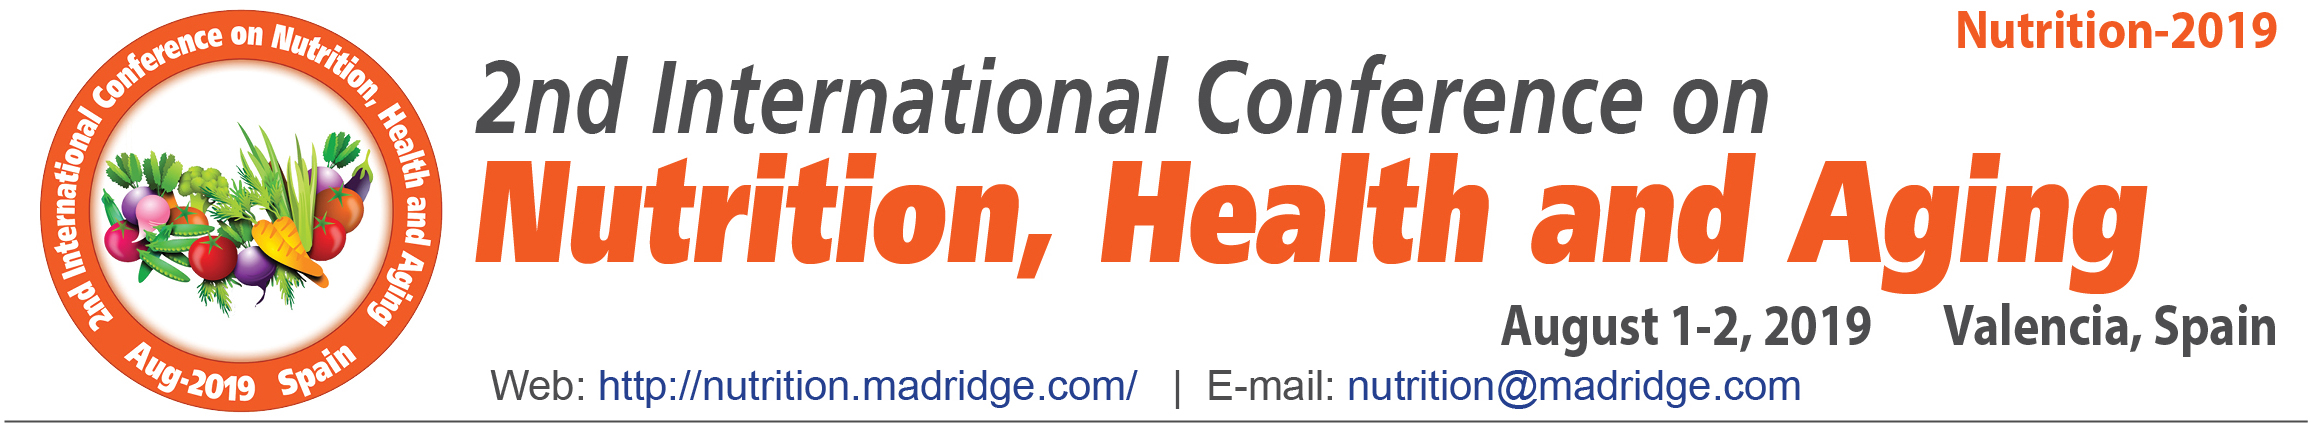 2nd International Conference on Nutrition, Health and Aging, Valencia, Spain, Spain